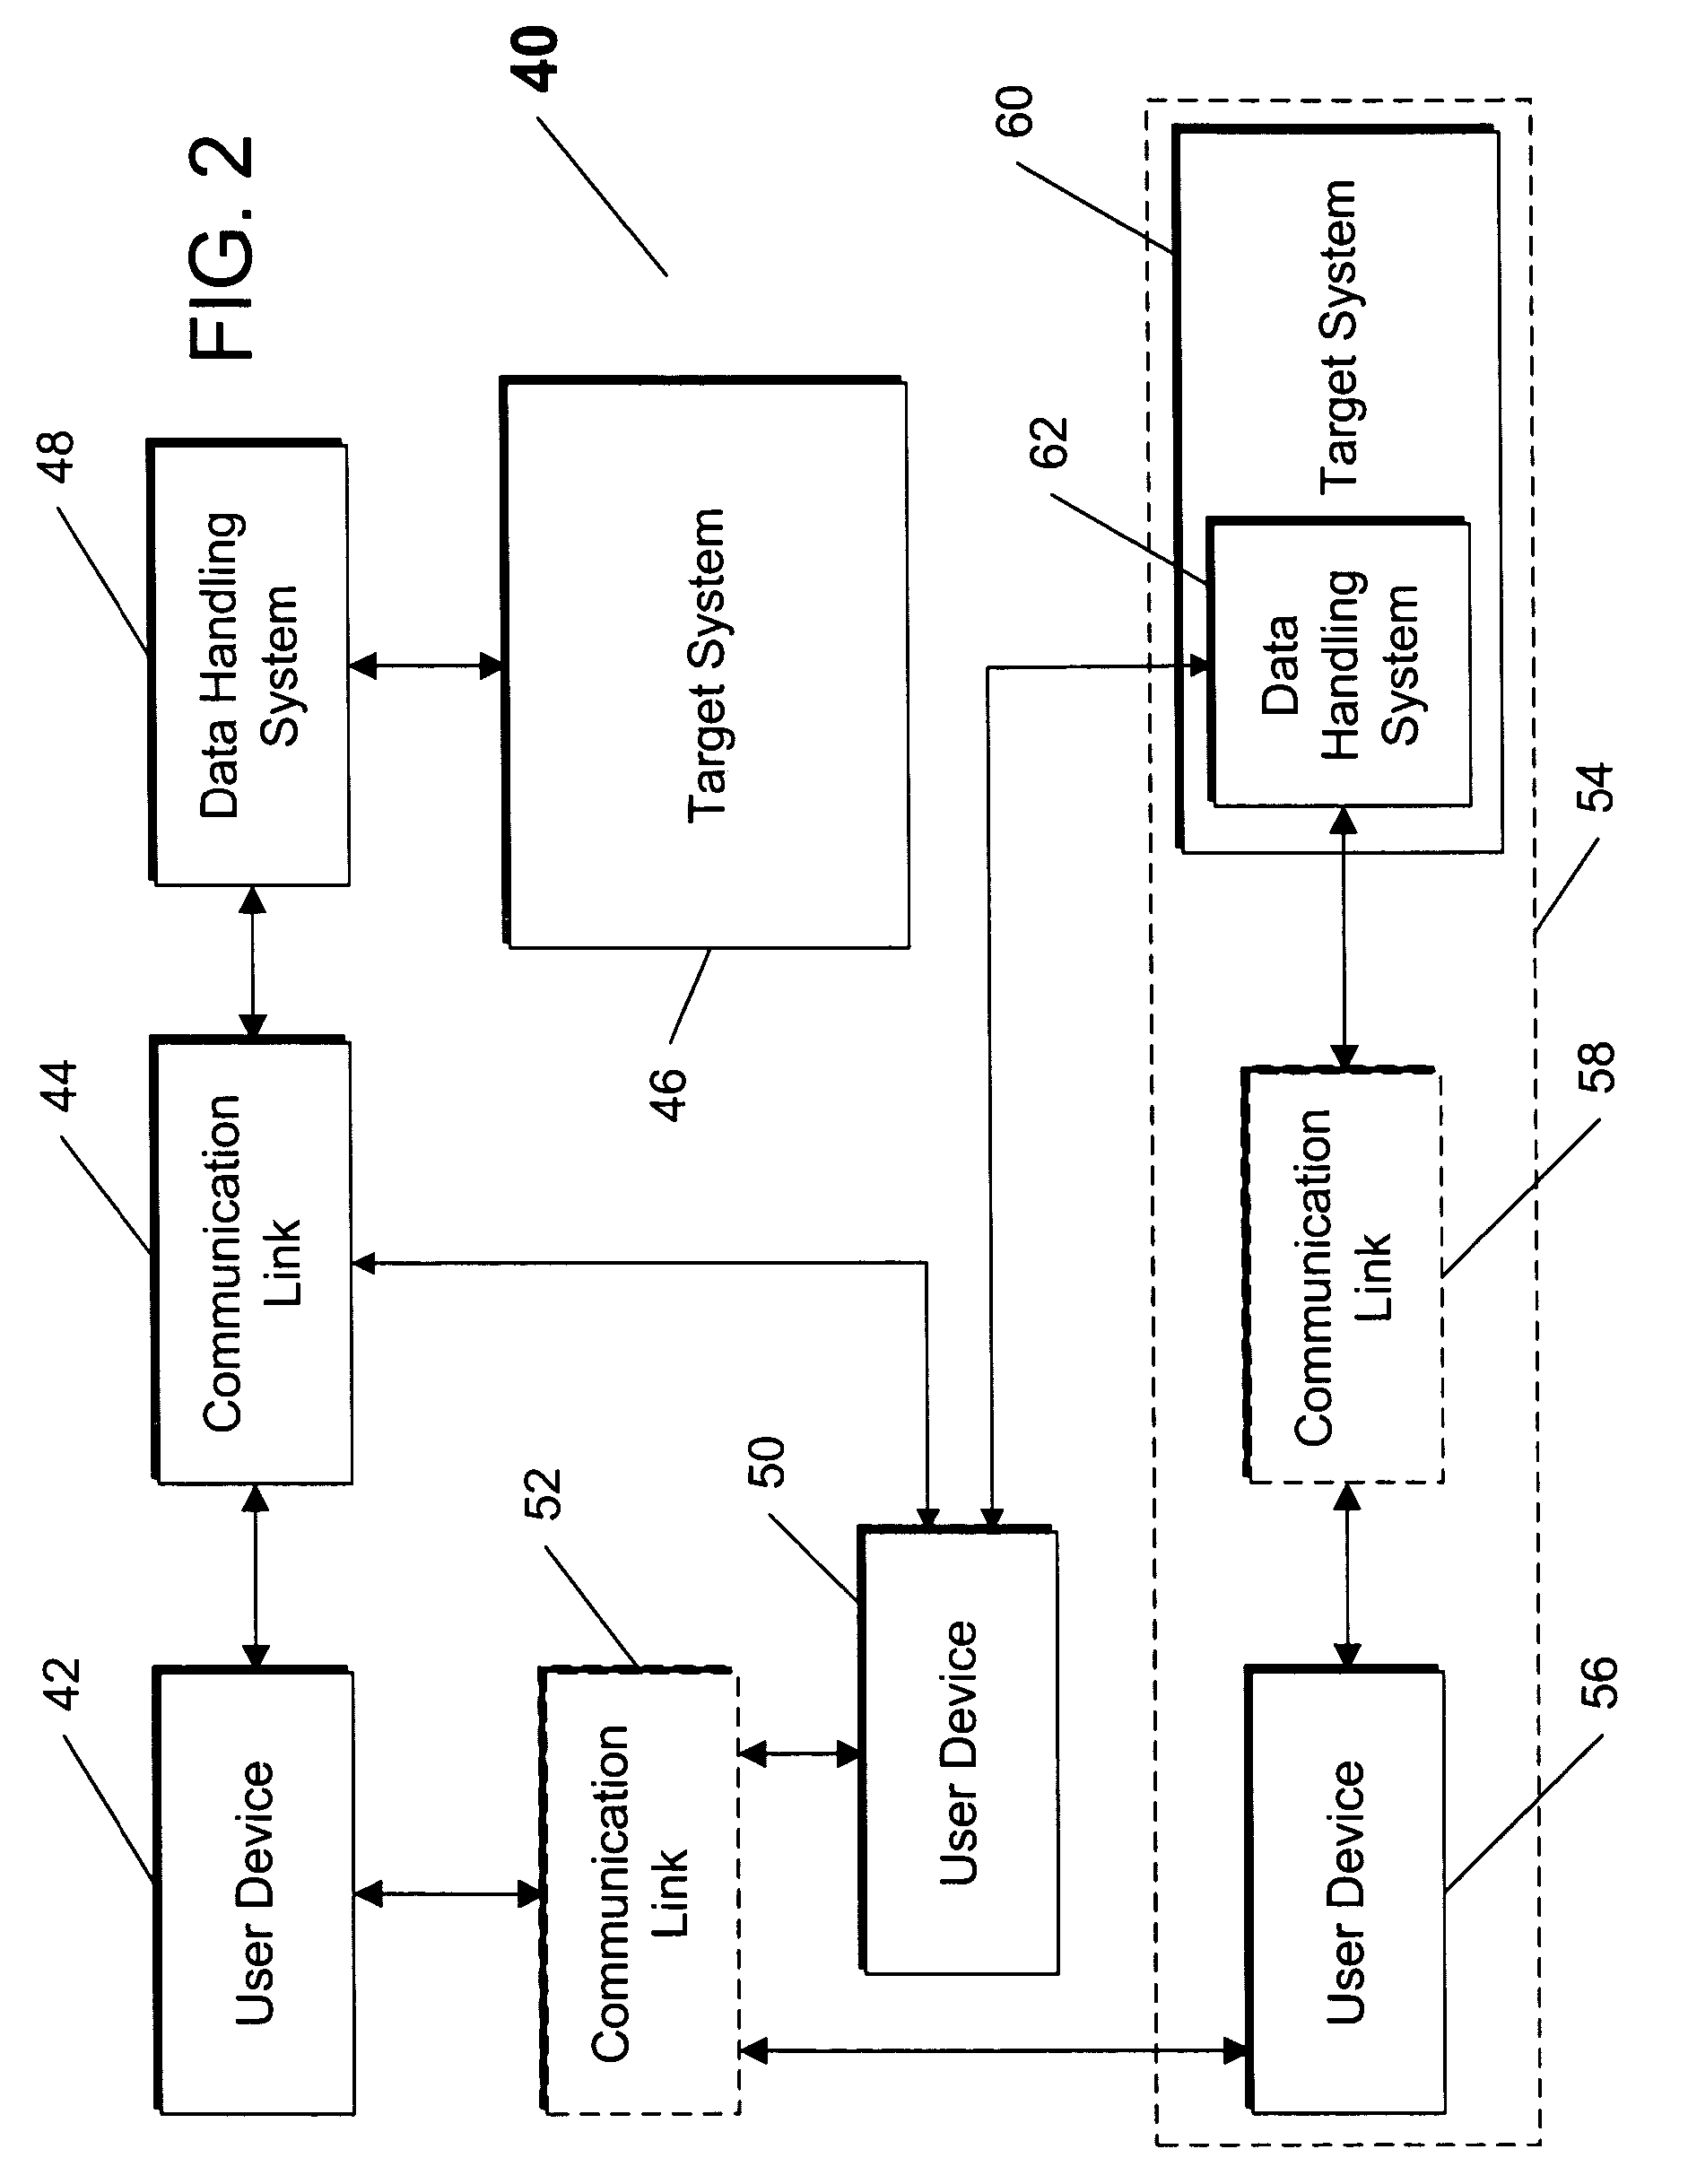 System and method for real-time configurable monitoring and management of task performance systems